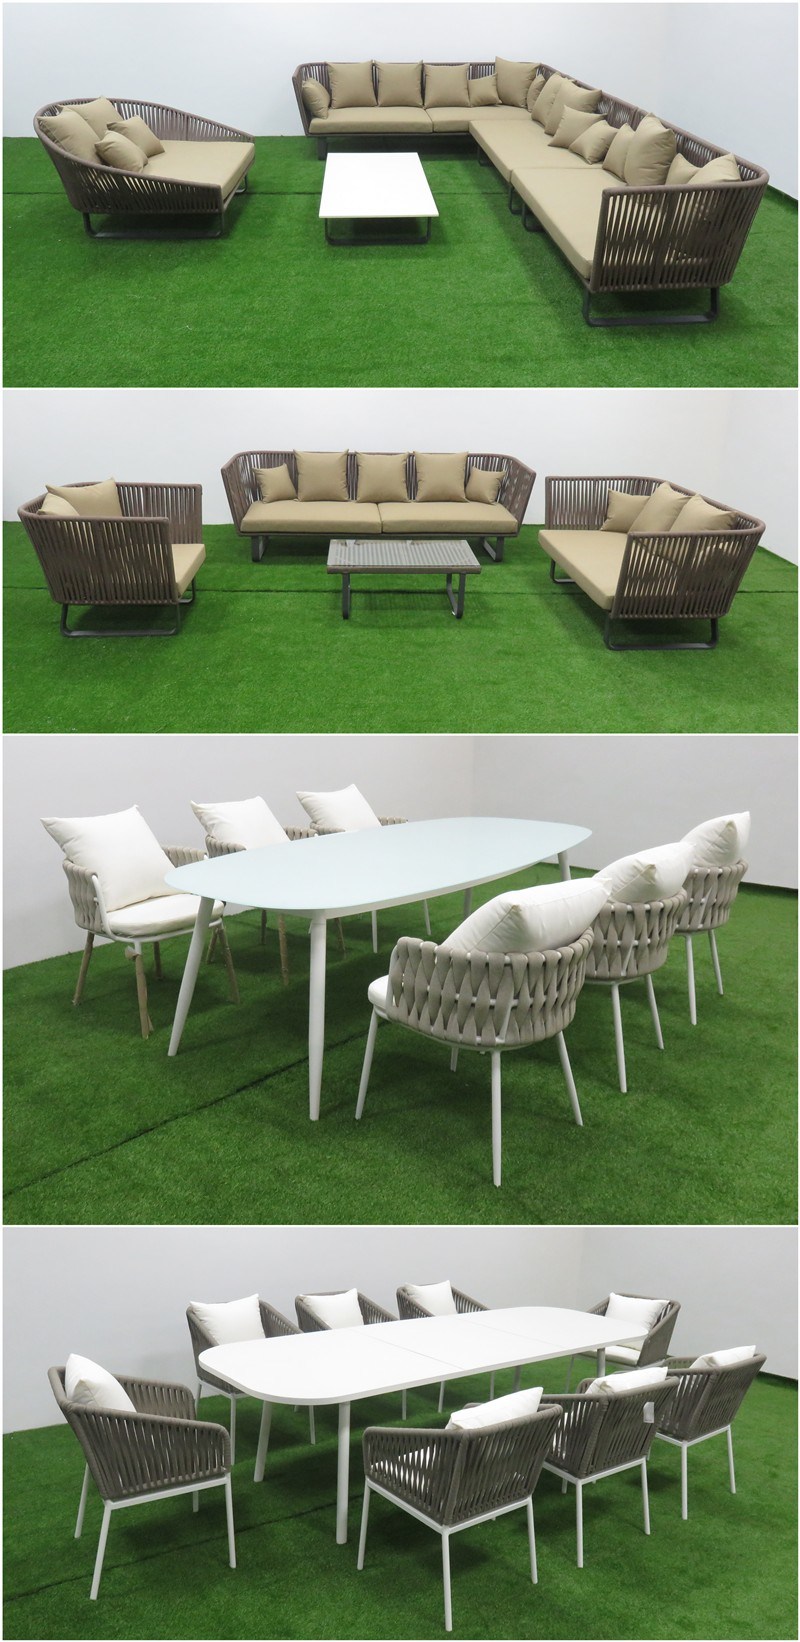 Rope Furniture Hotel Outdoorcord and Belt Dinng Table Chair Set